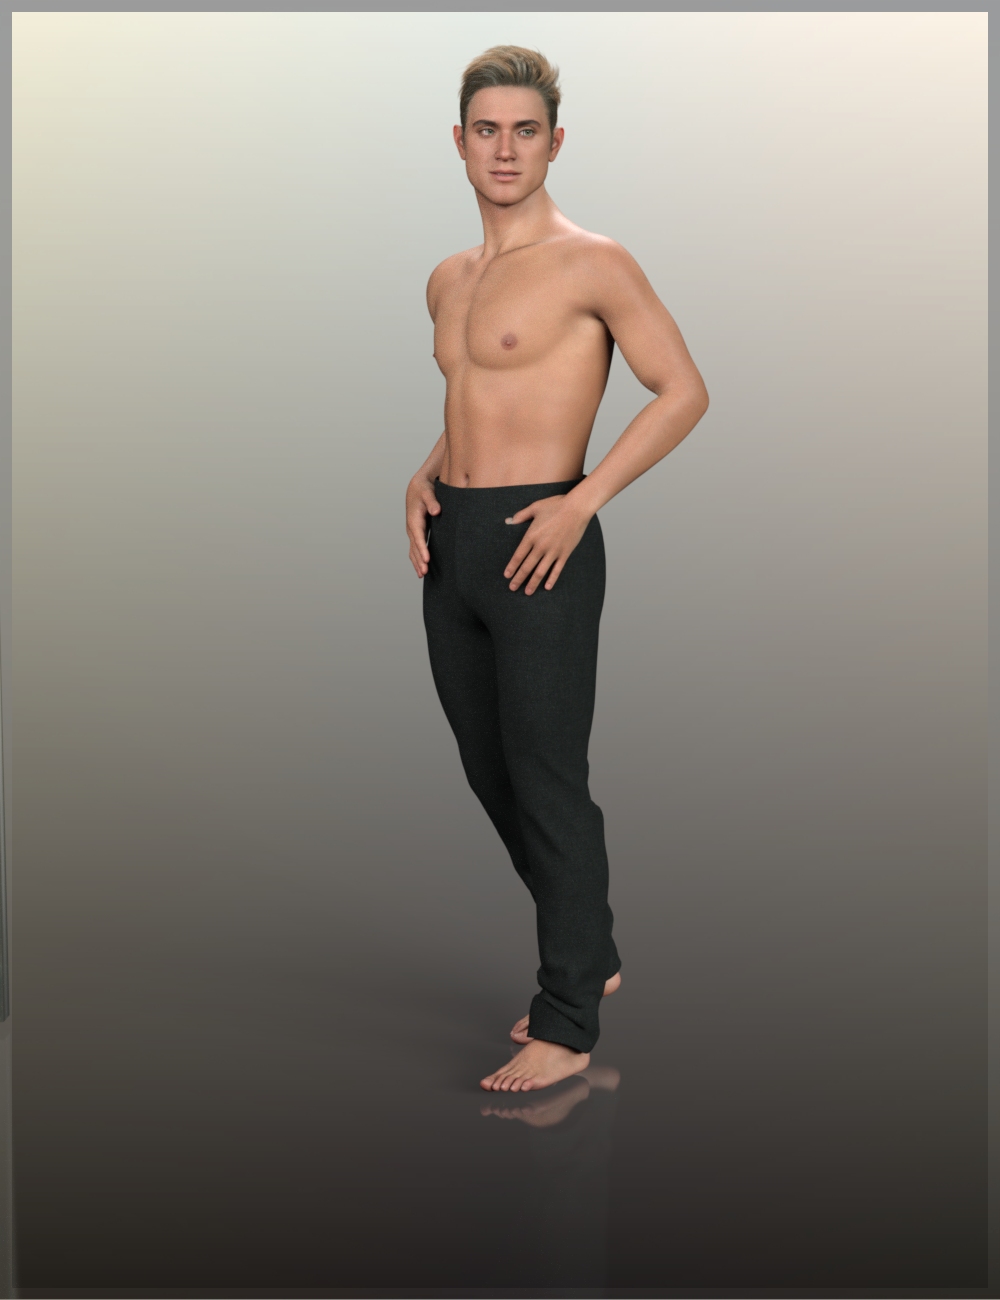 Masculine Classic Poses for Genesis 9 by: Handspan Studios, 3D Models by Daz 3D